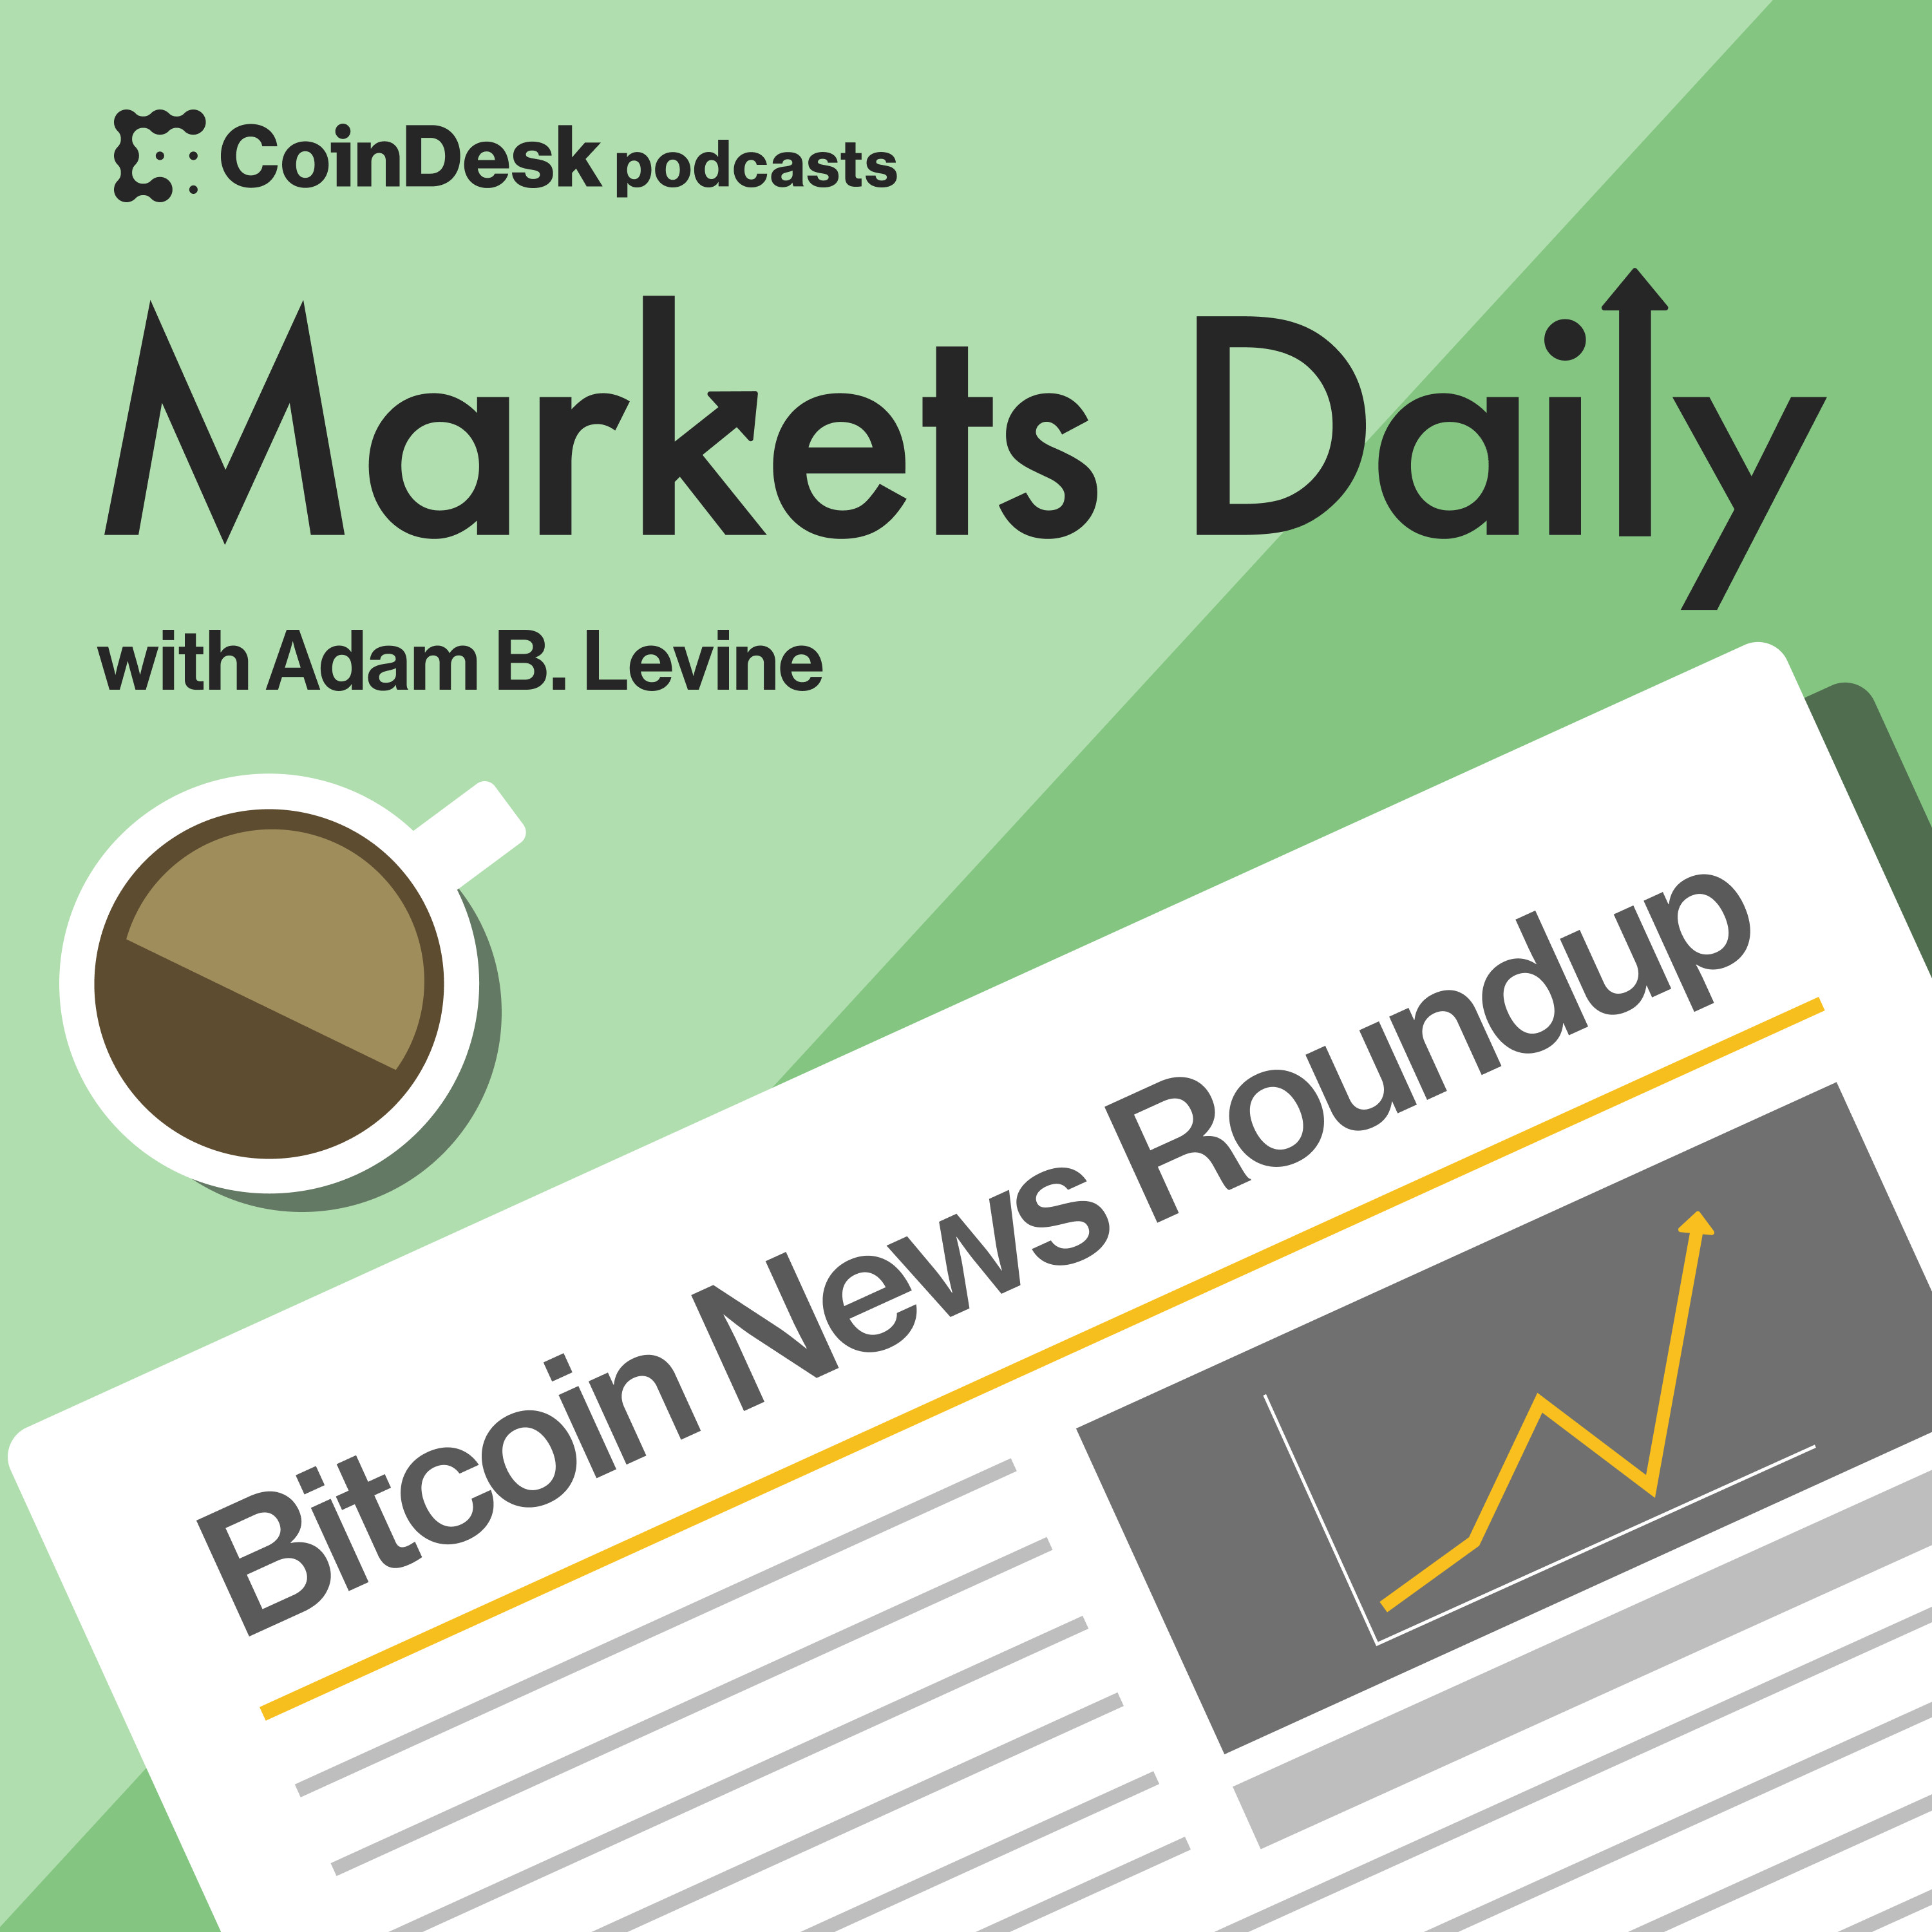 A highlight from Crypto Update | Bitcoin ETFs in Limbo, Regulatory Moves, and Global Crypto Growth